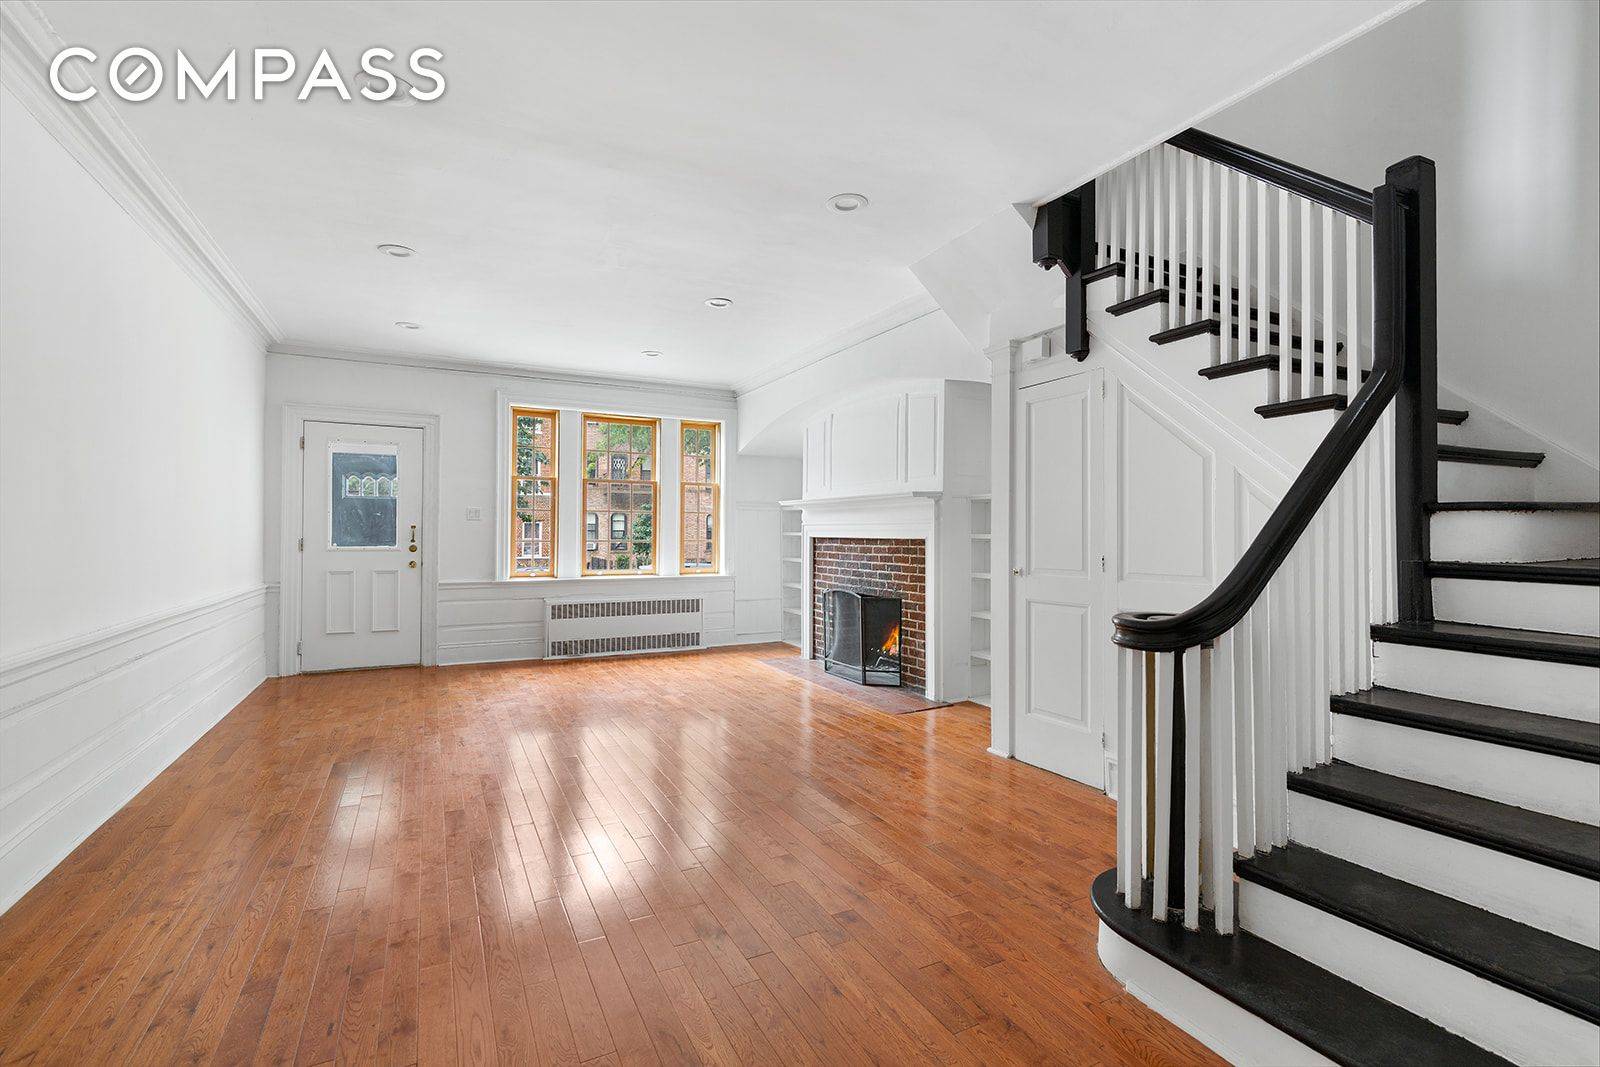 Space, privacy, comfort, and convenience are exactly what you need right now, and this gracious historic Prospect Lefferts Gardens single family eight room brick townhouse delivers on all fronts.